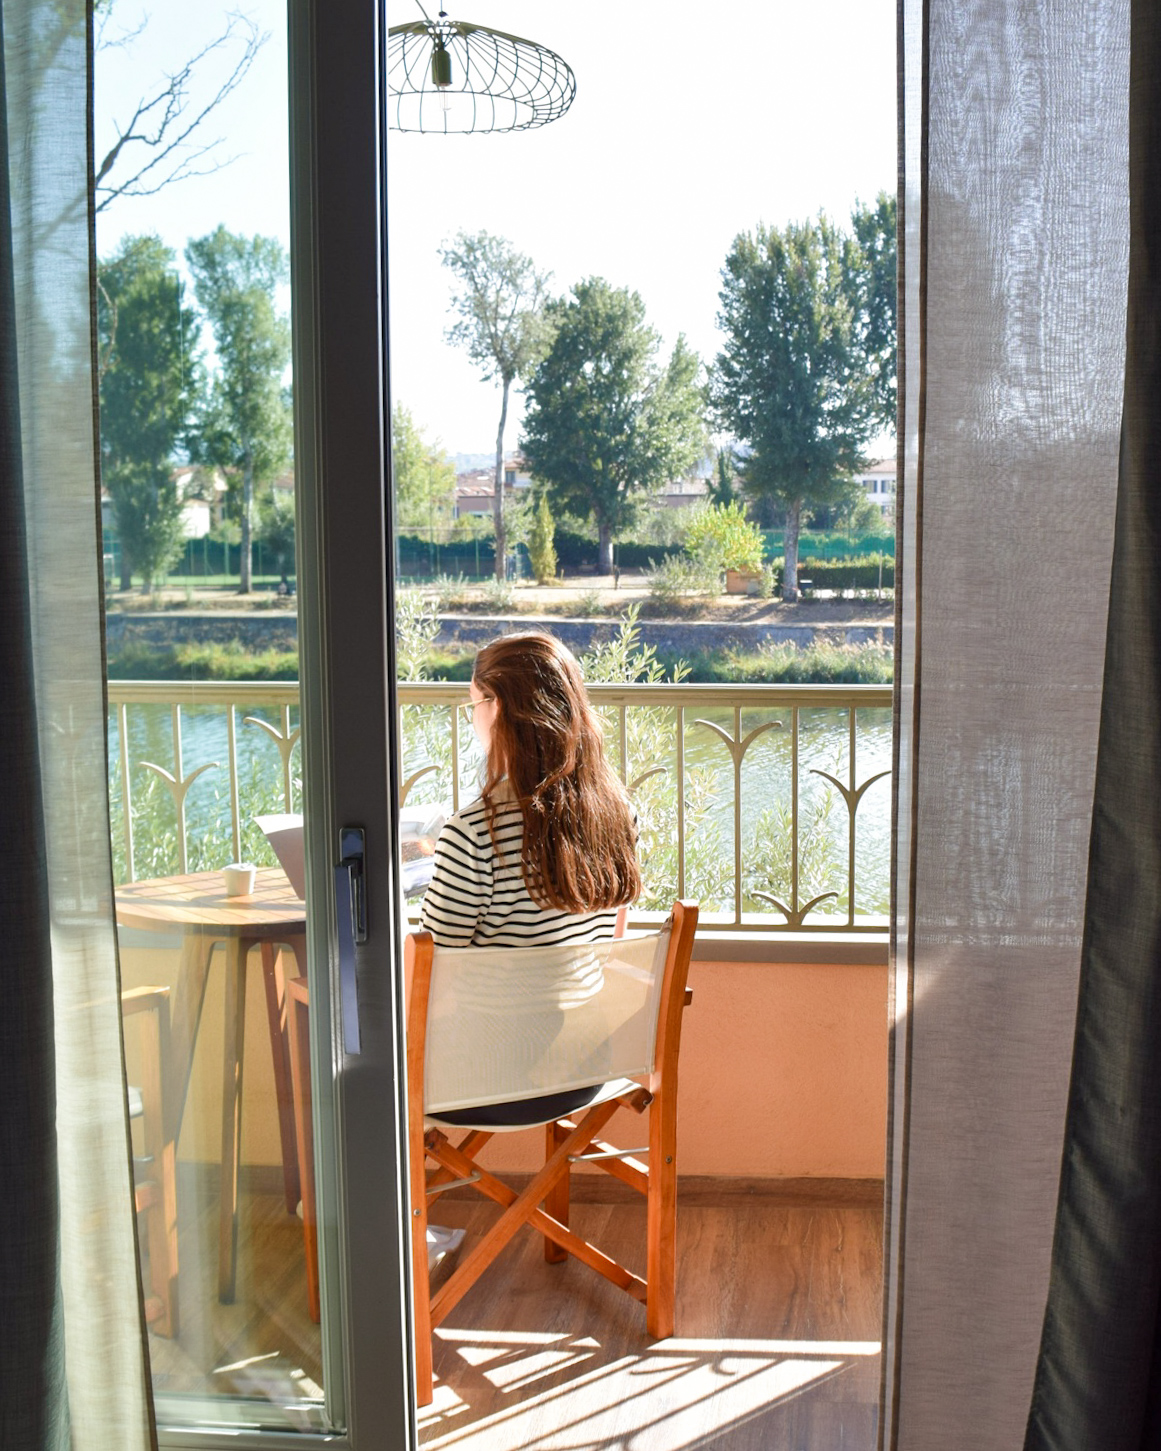 Staying At Ville Sull’Arno | Florence